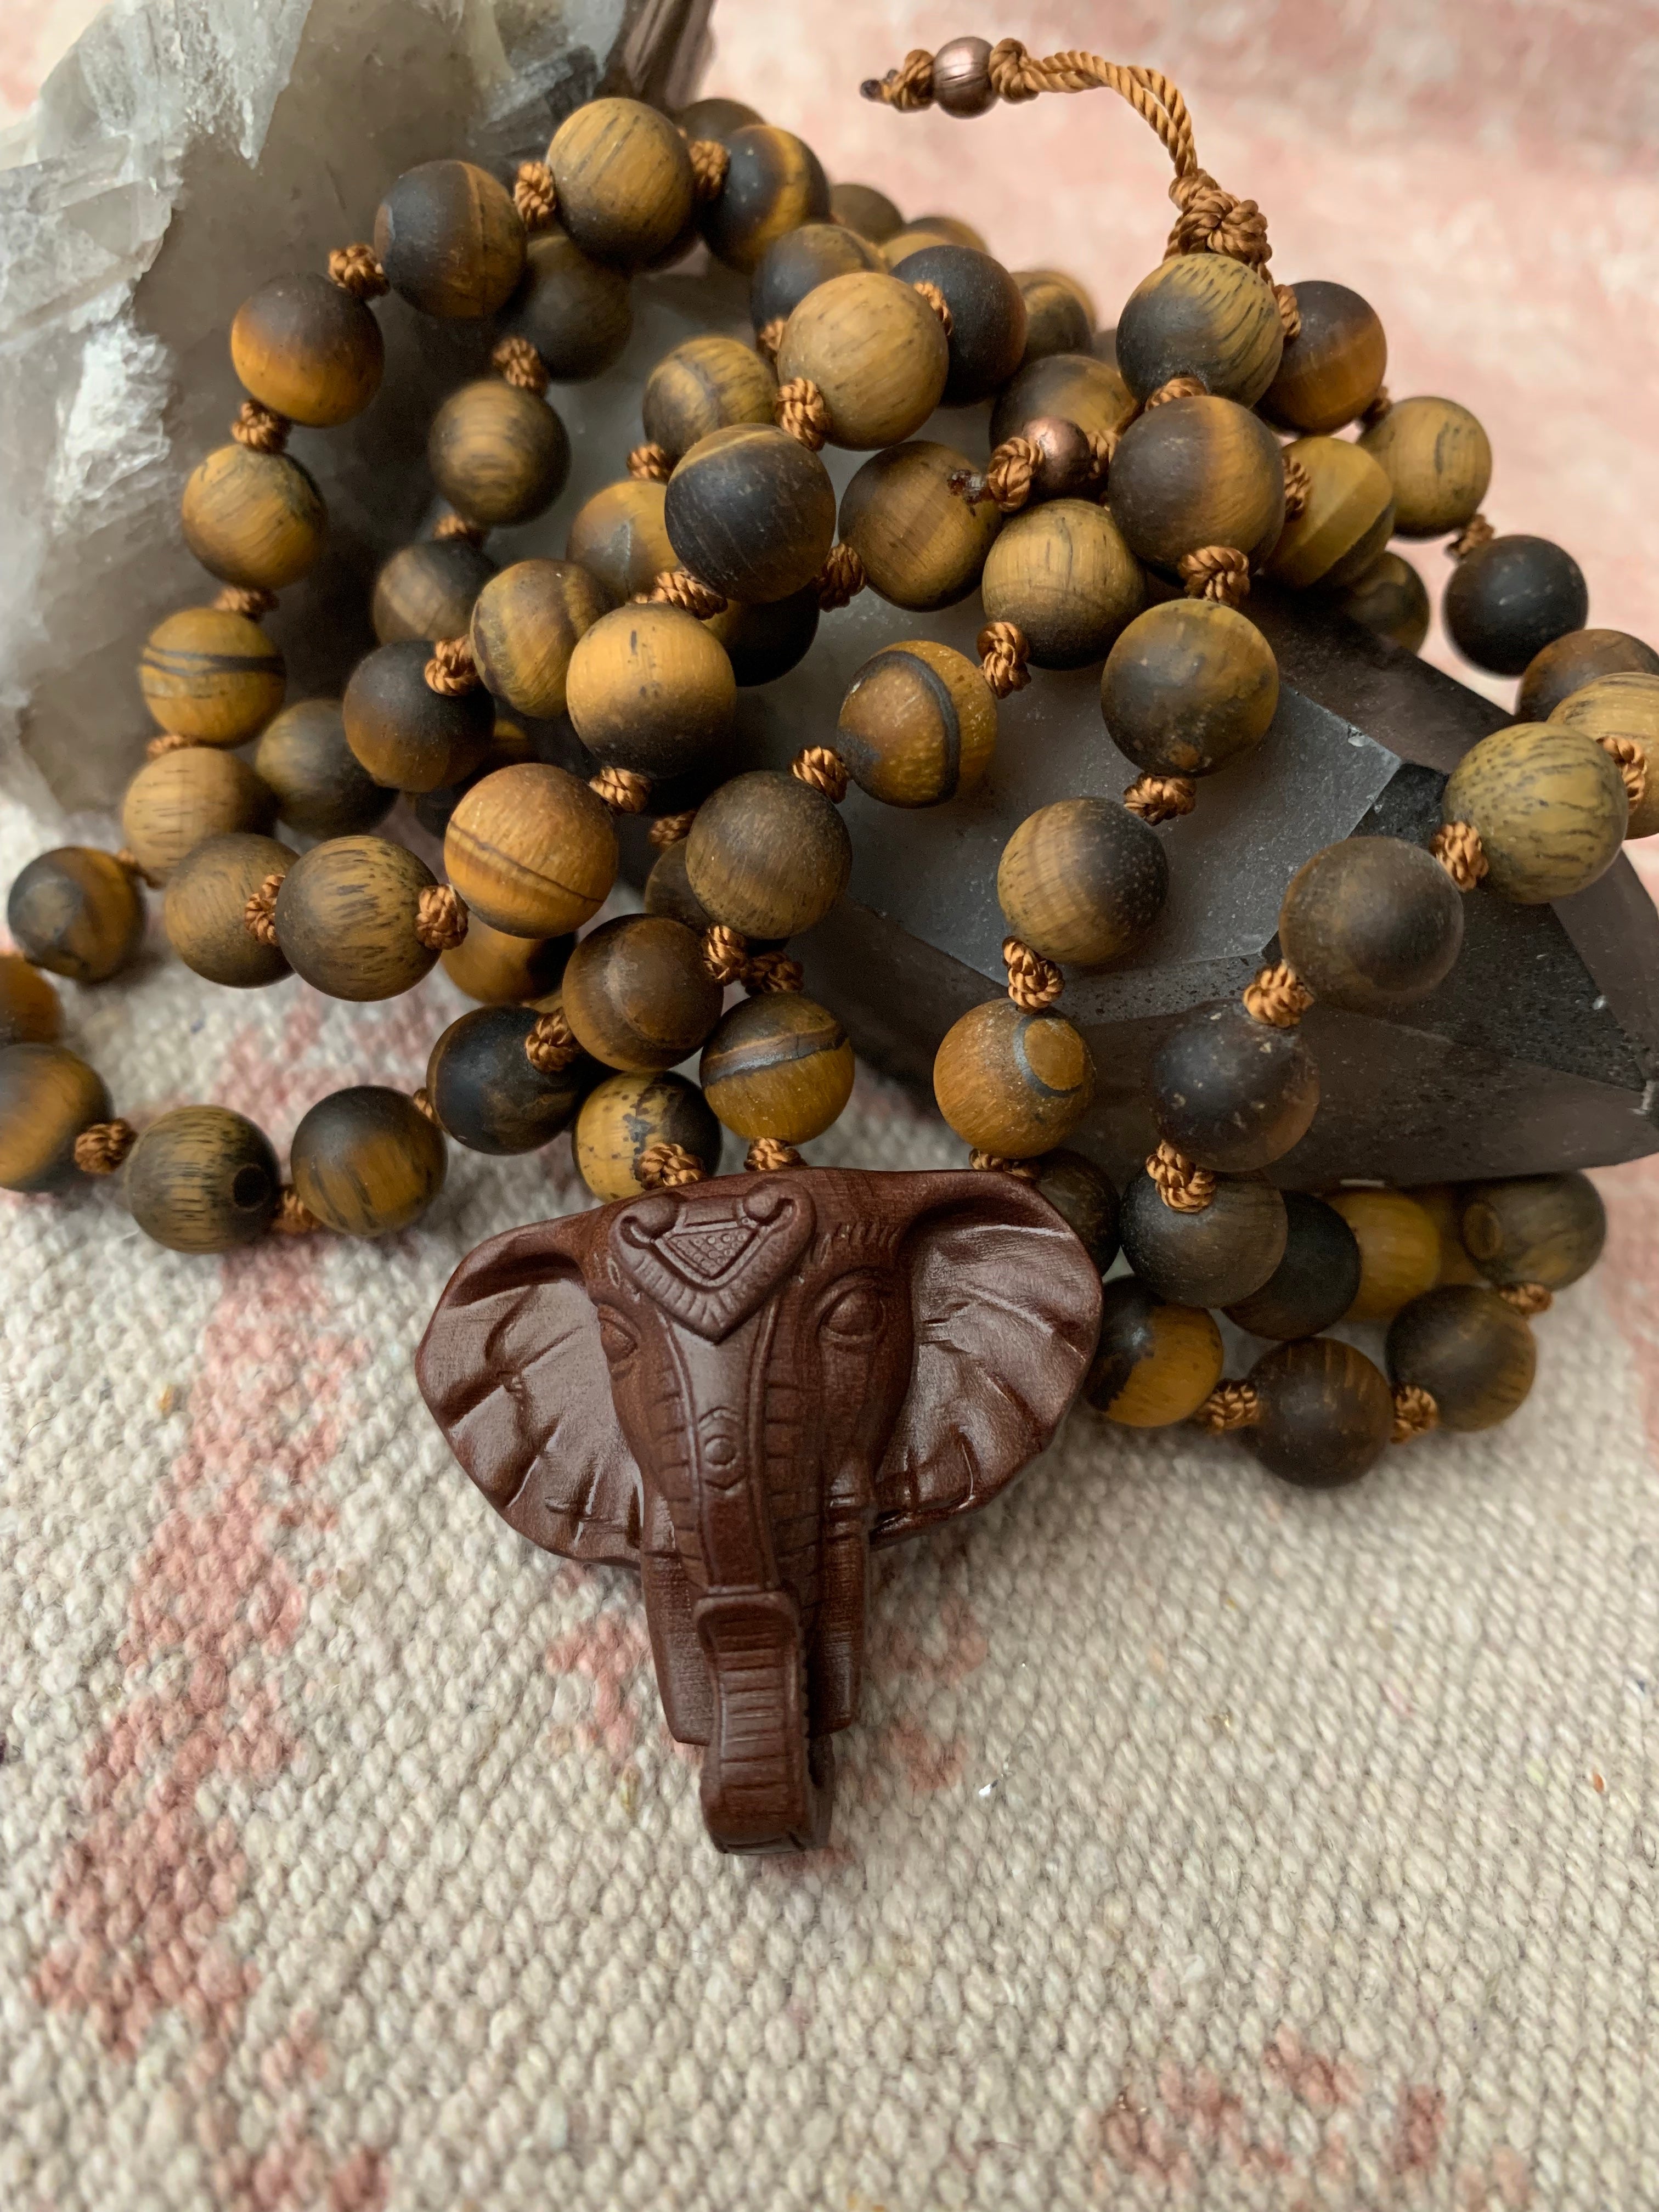 How To Use Mala Beads to Remain Present in your Meditation